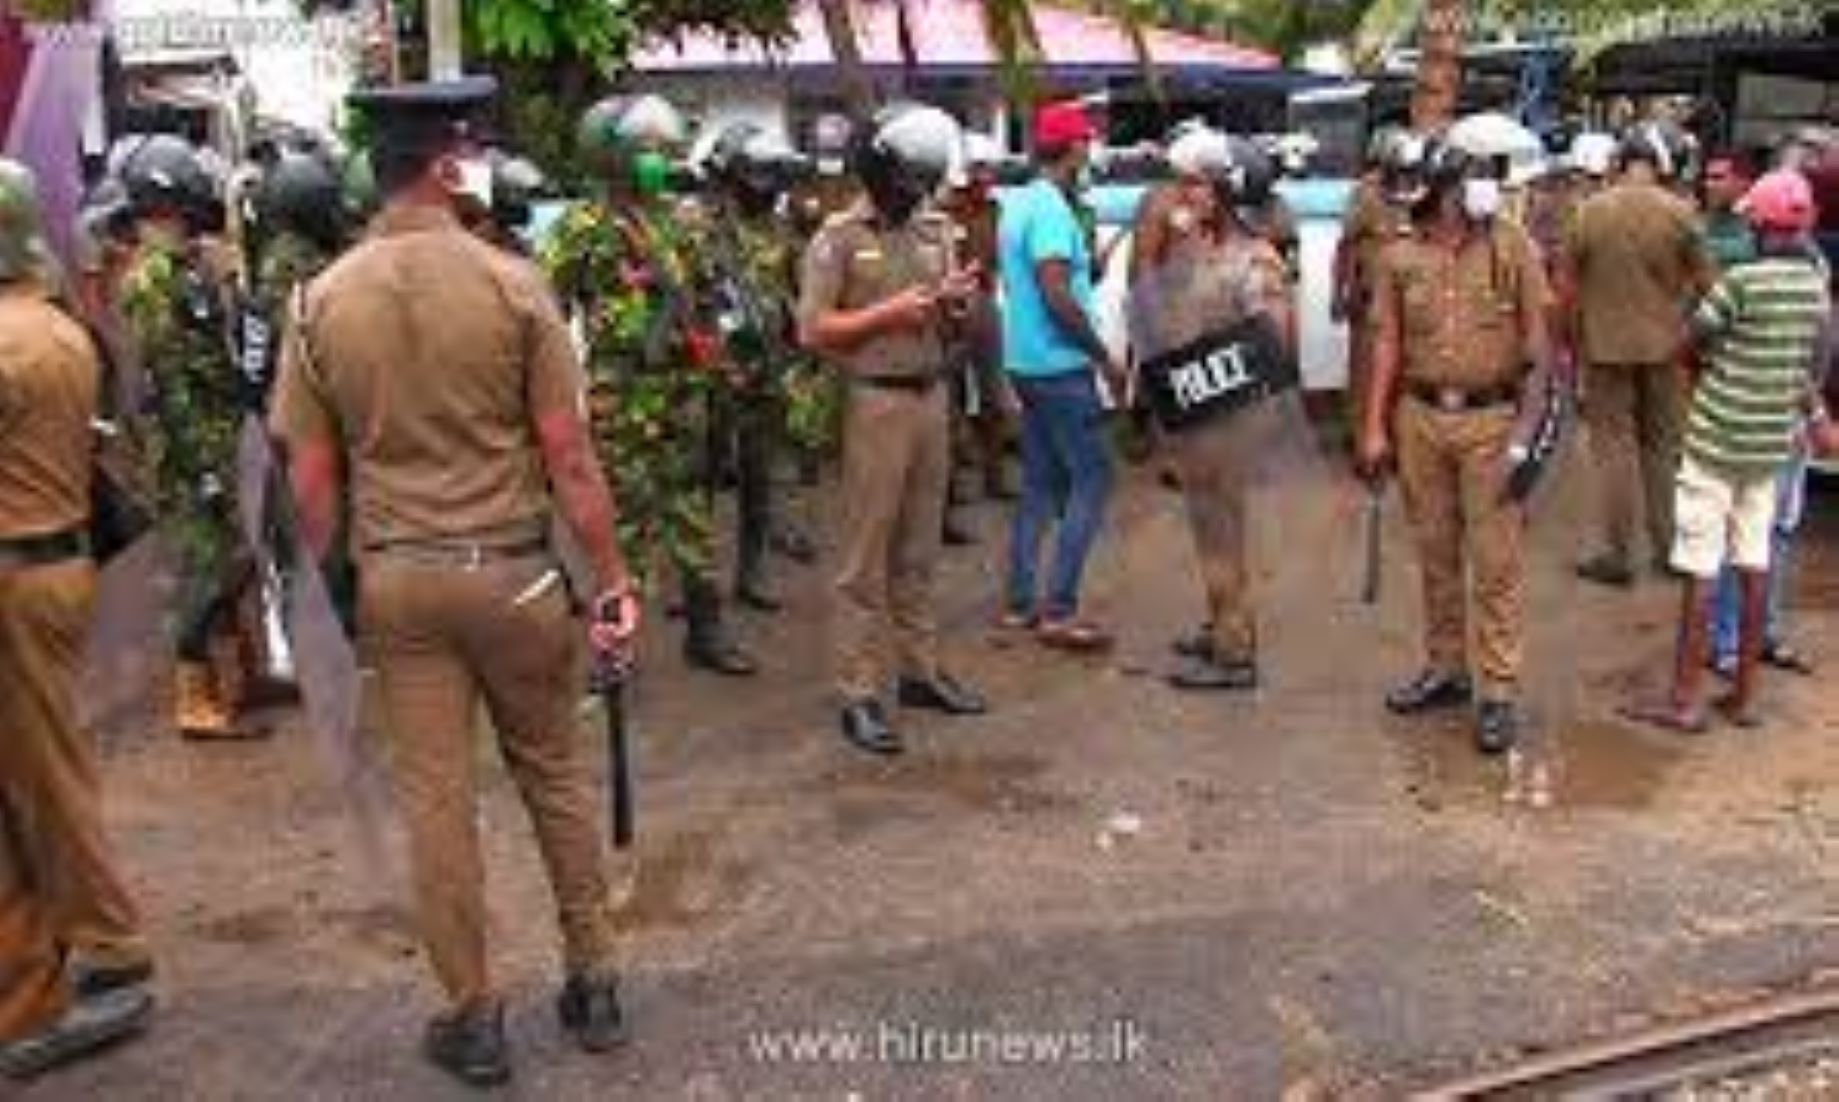 Sri Lankan Police Arrested 13 For Unruly Behaviour At Gas Stations